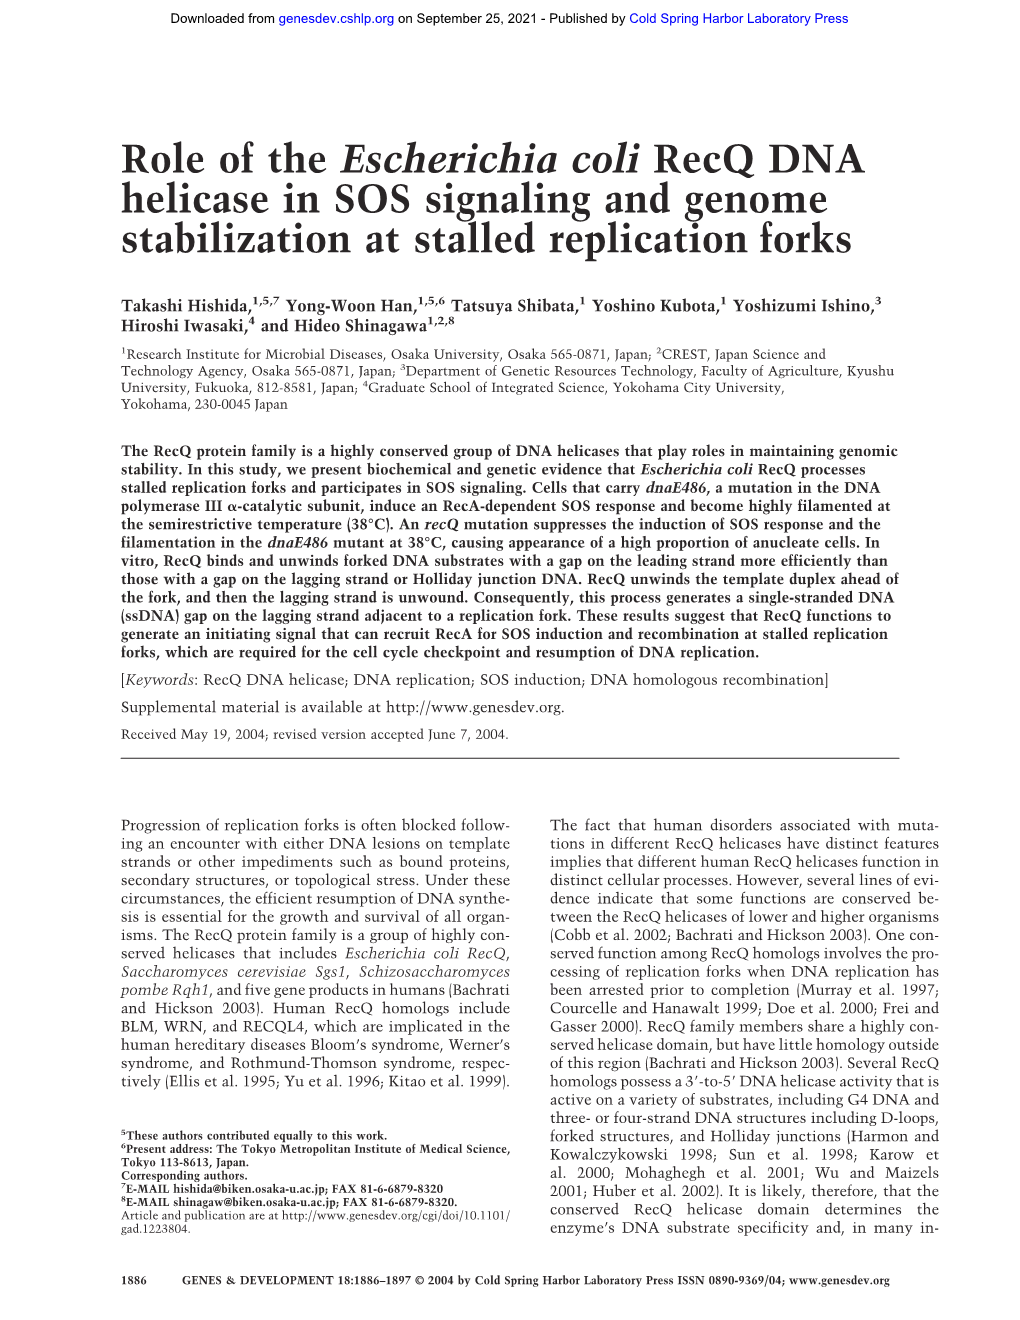 Role of the Escherichia Coli Recq DNA Helicase in SOS Signaling and Genome Stabilization at Stalled Replication Forks